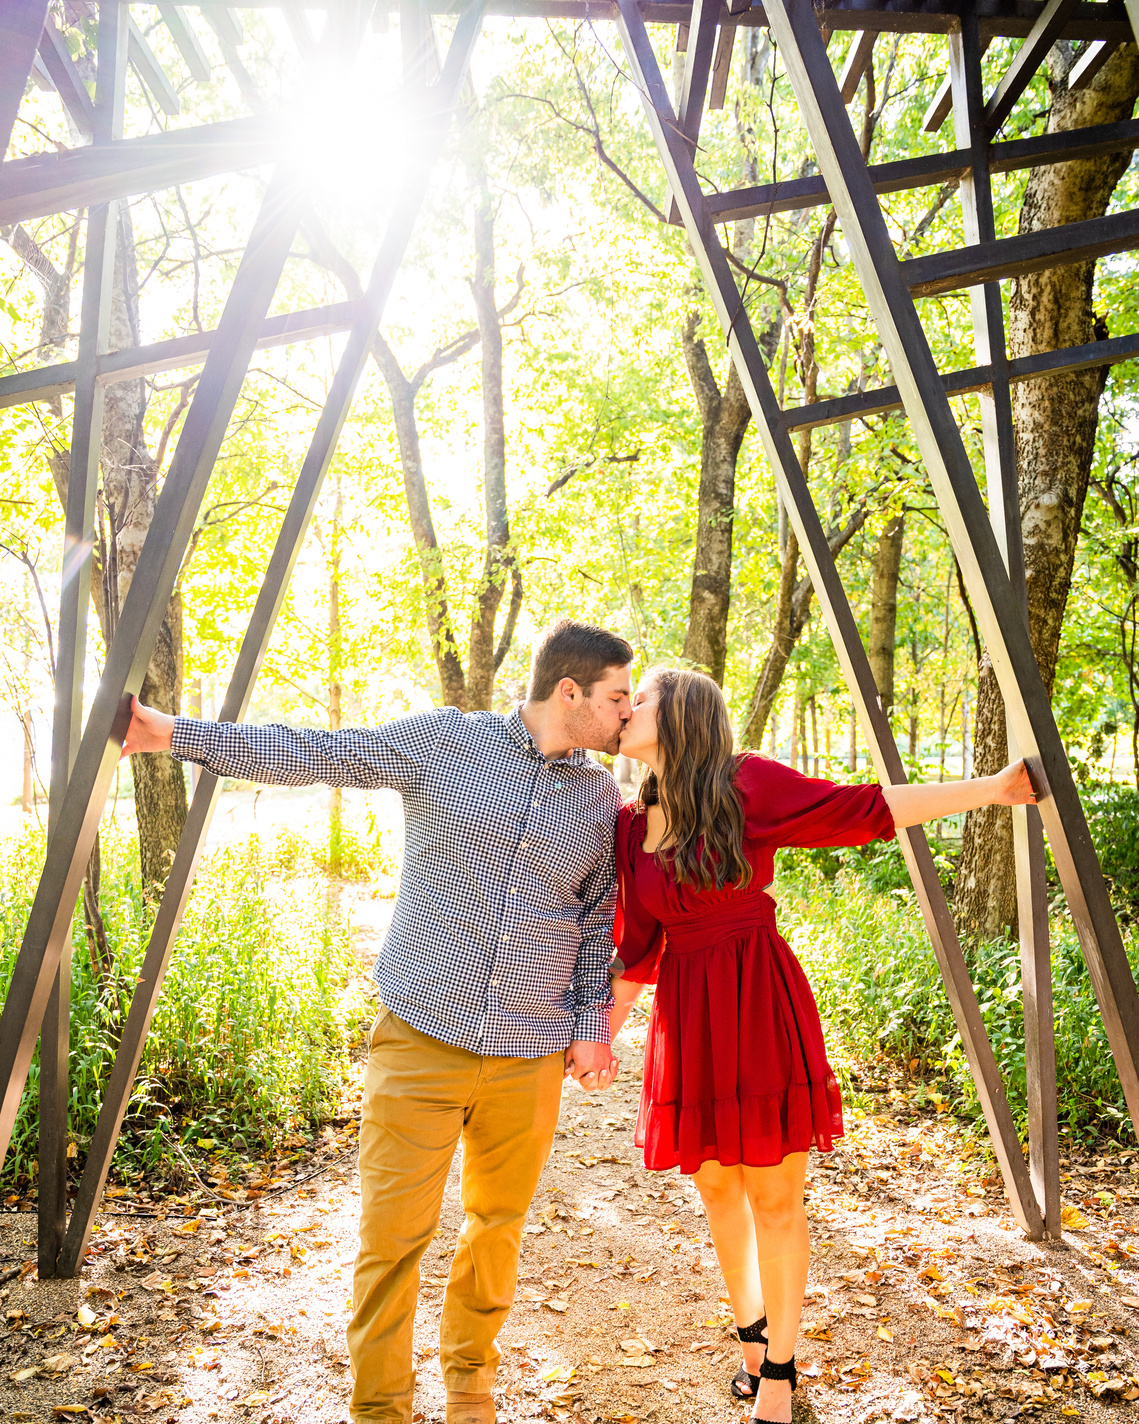 Jessica and Warner's Engagement shoot at Coolidge Park in Chattanooga, TN